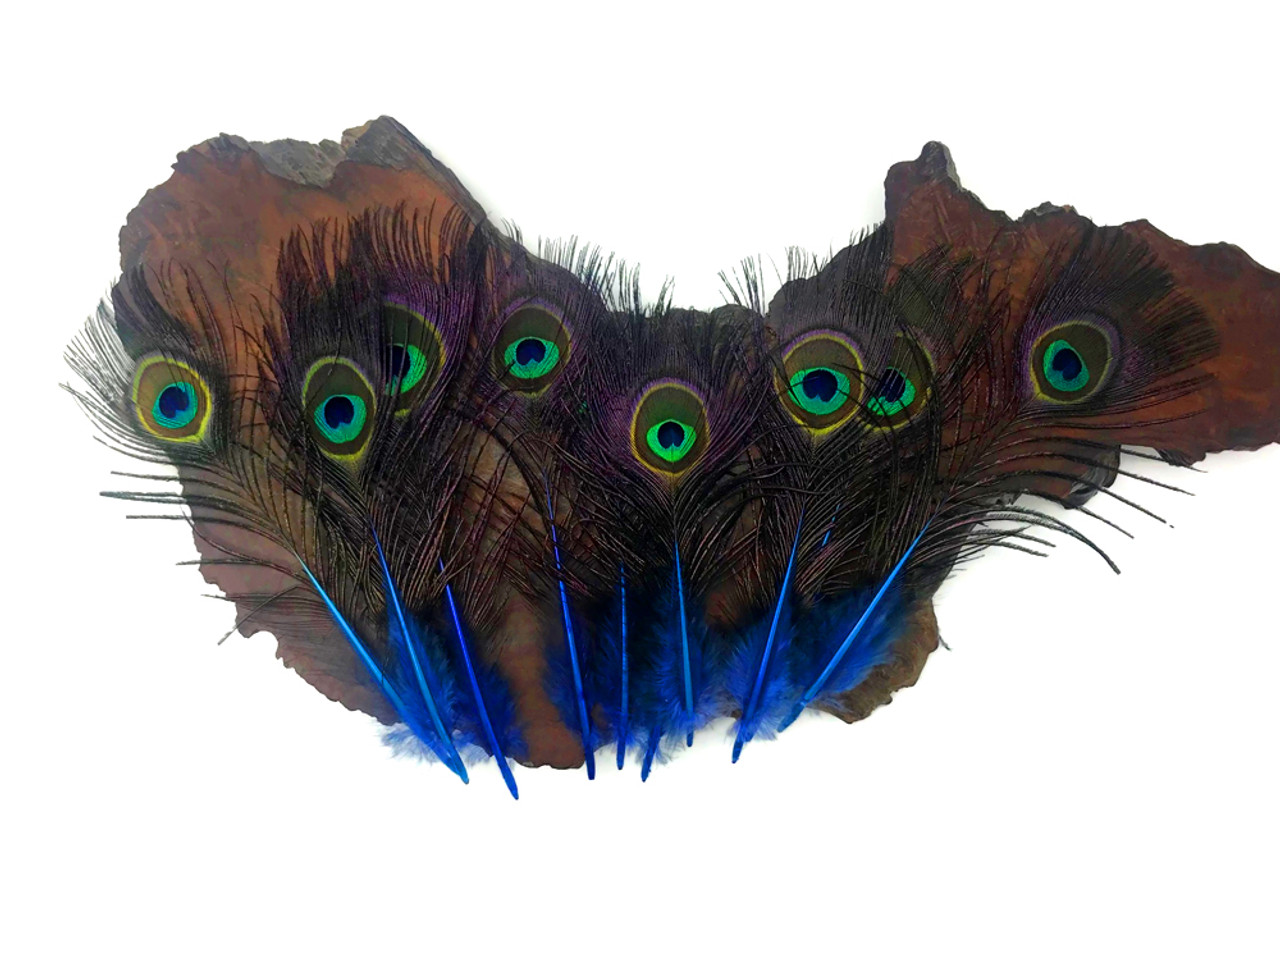 50 Pieces - Turquoise Blue Mini Natural Peacock Tail Body with Eyes Wholesale Feathers (Bulk) Halloween Costume Craft Supplier | Moonlight Feather